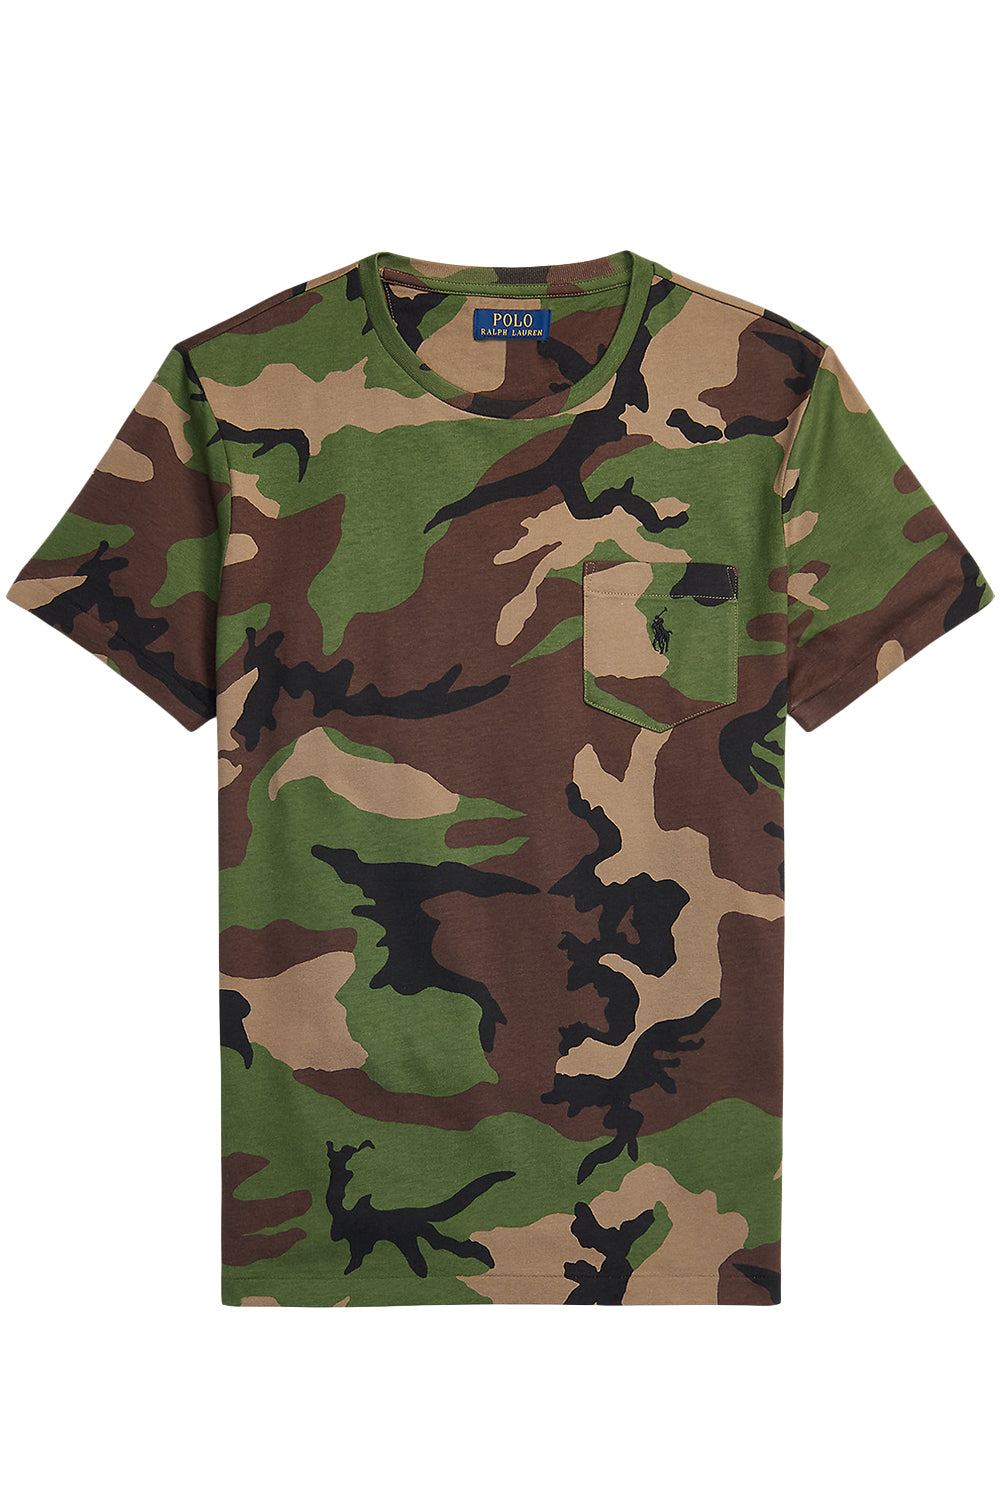 Image of Tshirt stampa camouflage - POLO RALPH LAUREN